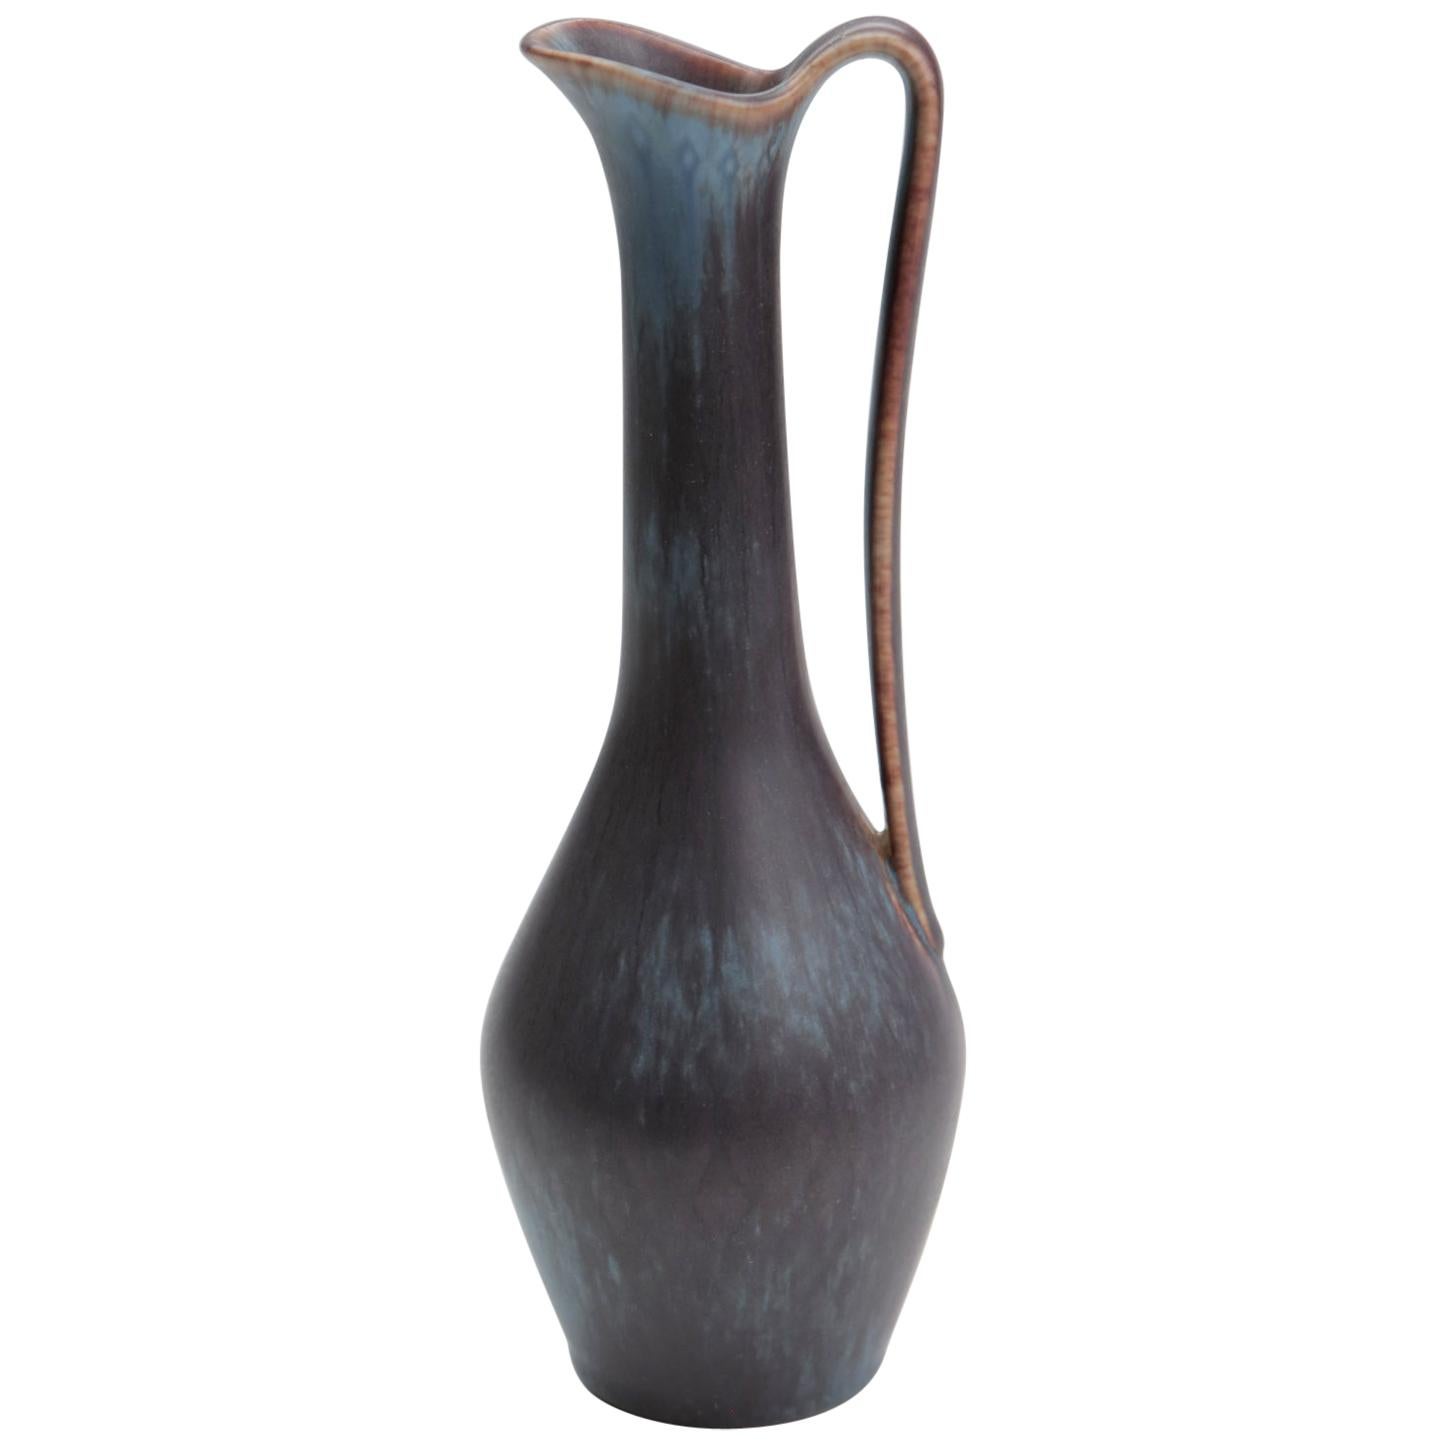 Gunnar Nylund "ASG" Pitcher in Blue Hares Fur Glaze for Rorstrand, Sweden, 1950s